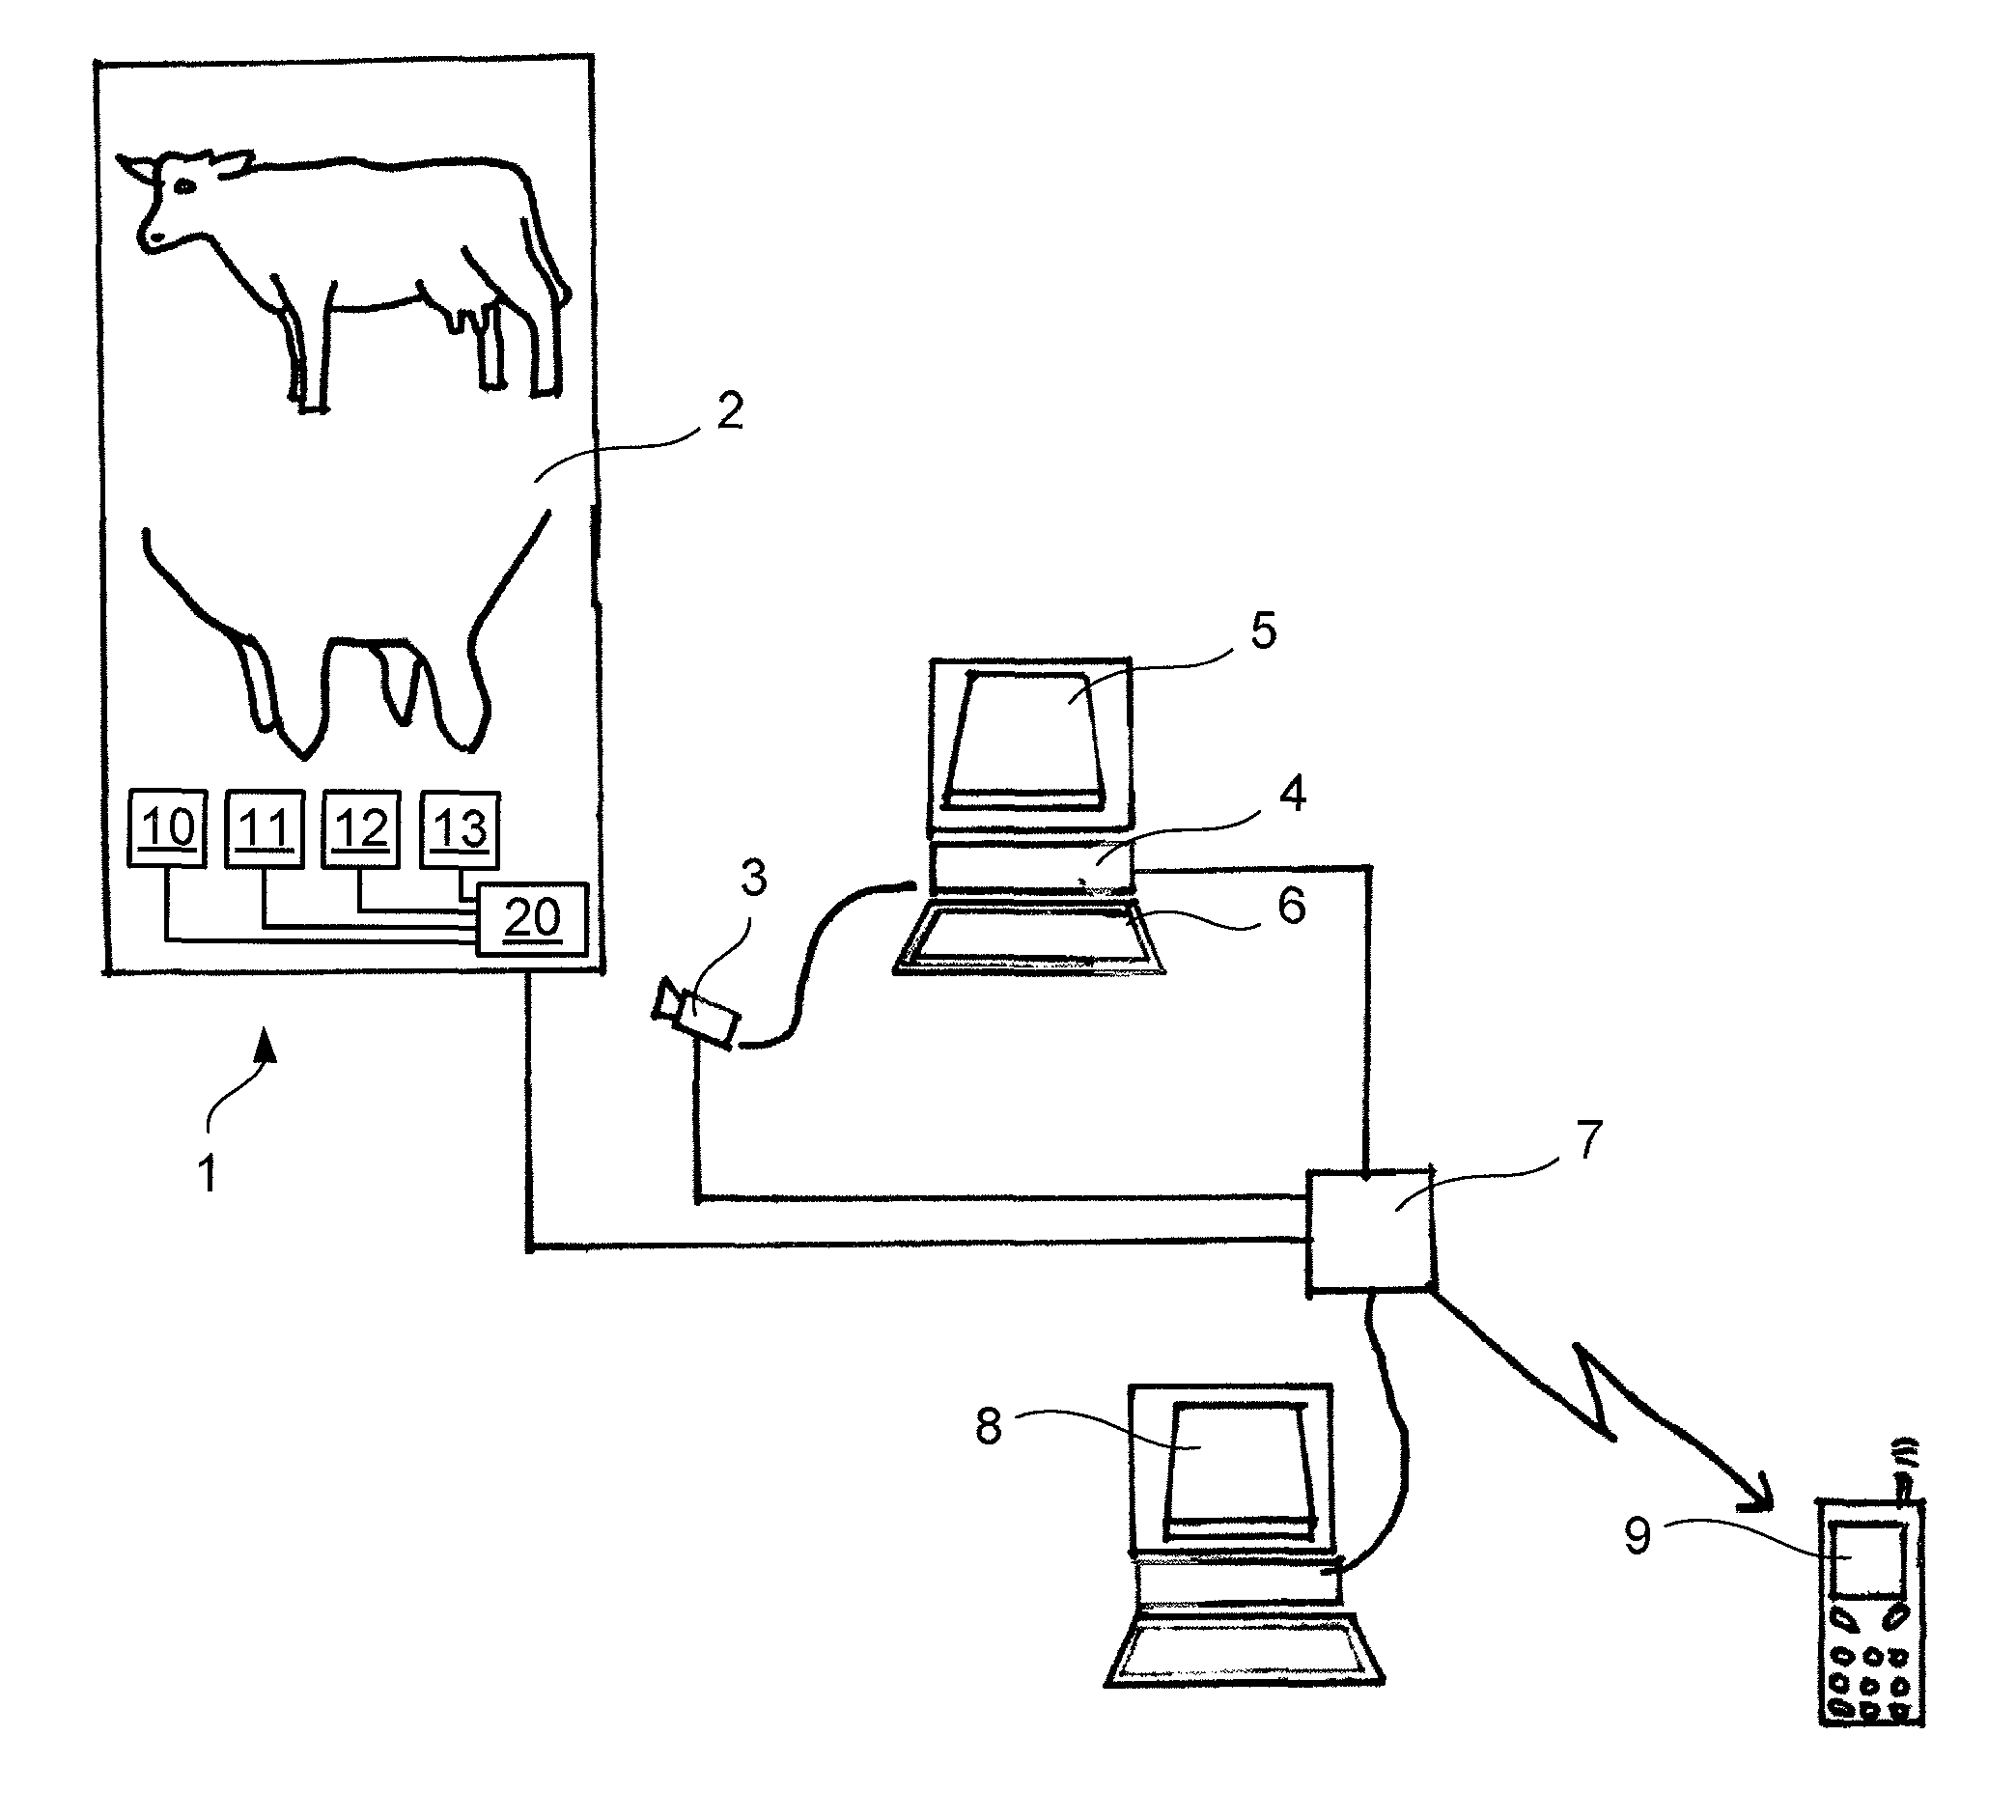 System and a method for controlling an automatic milking system